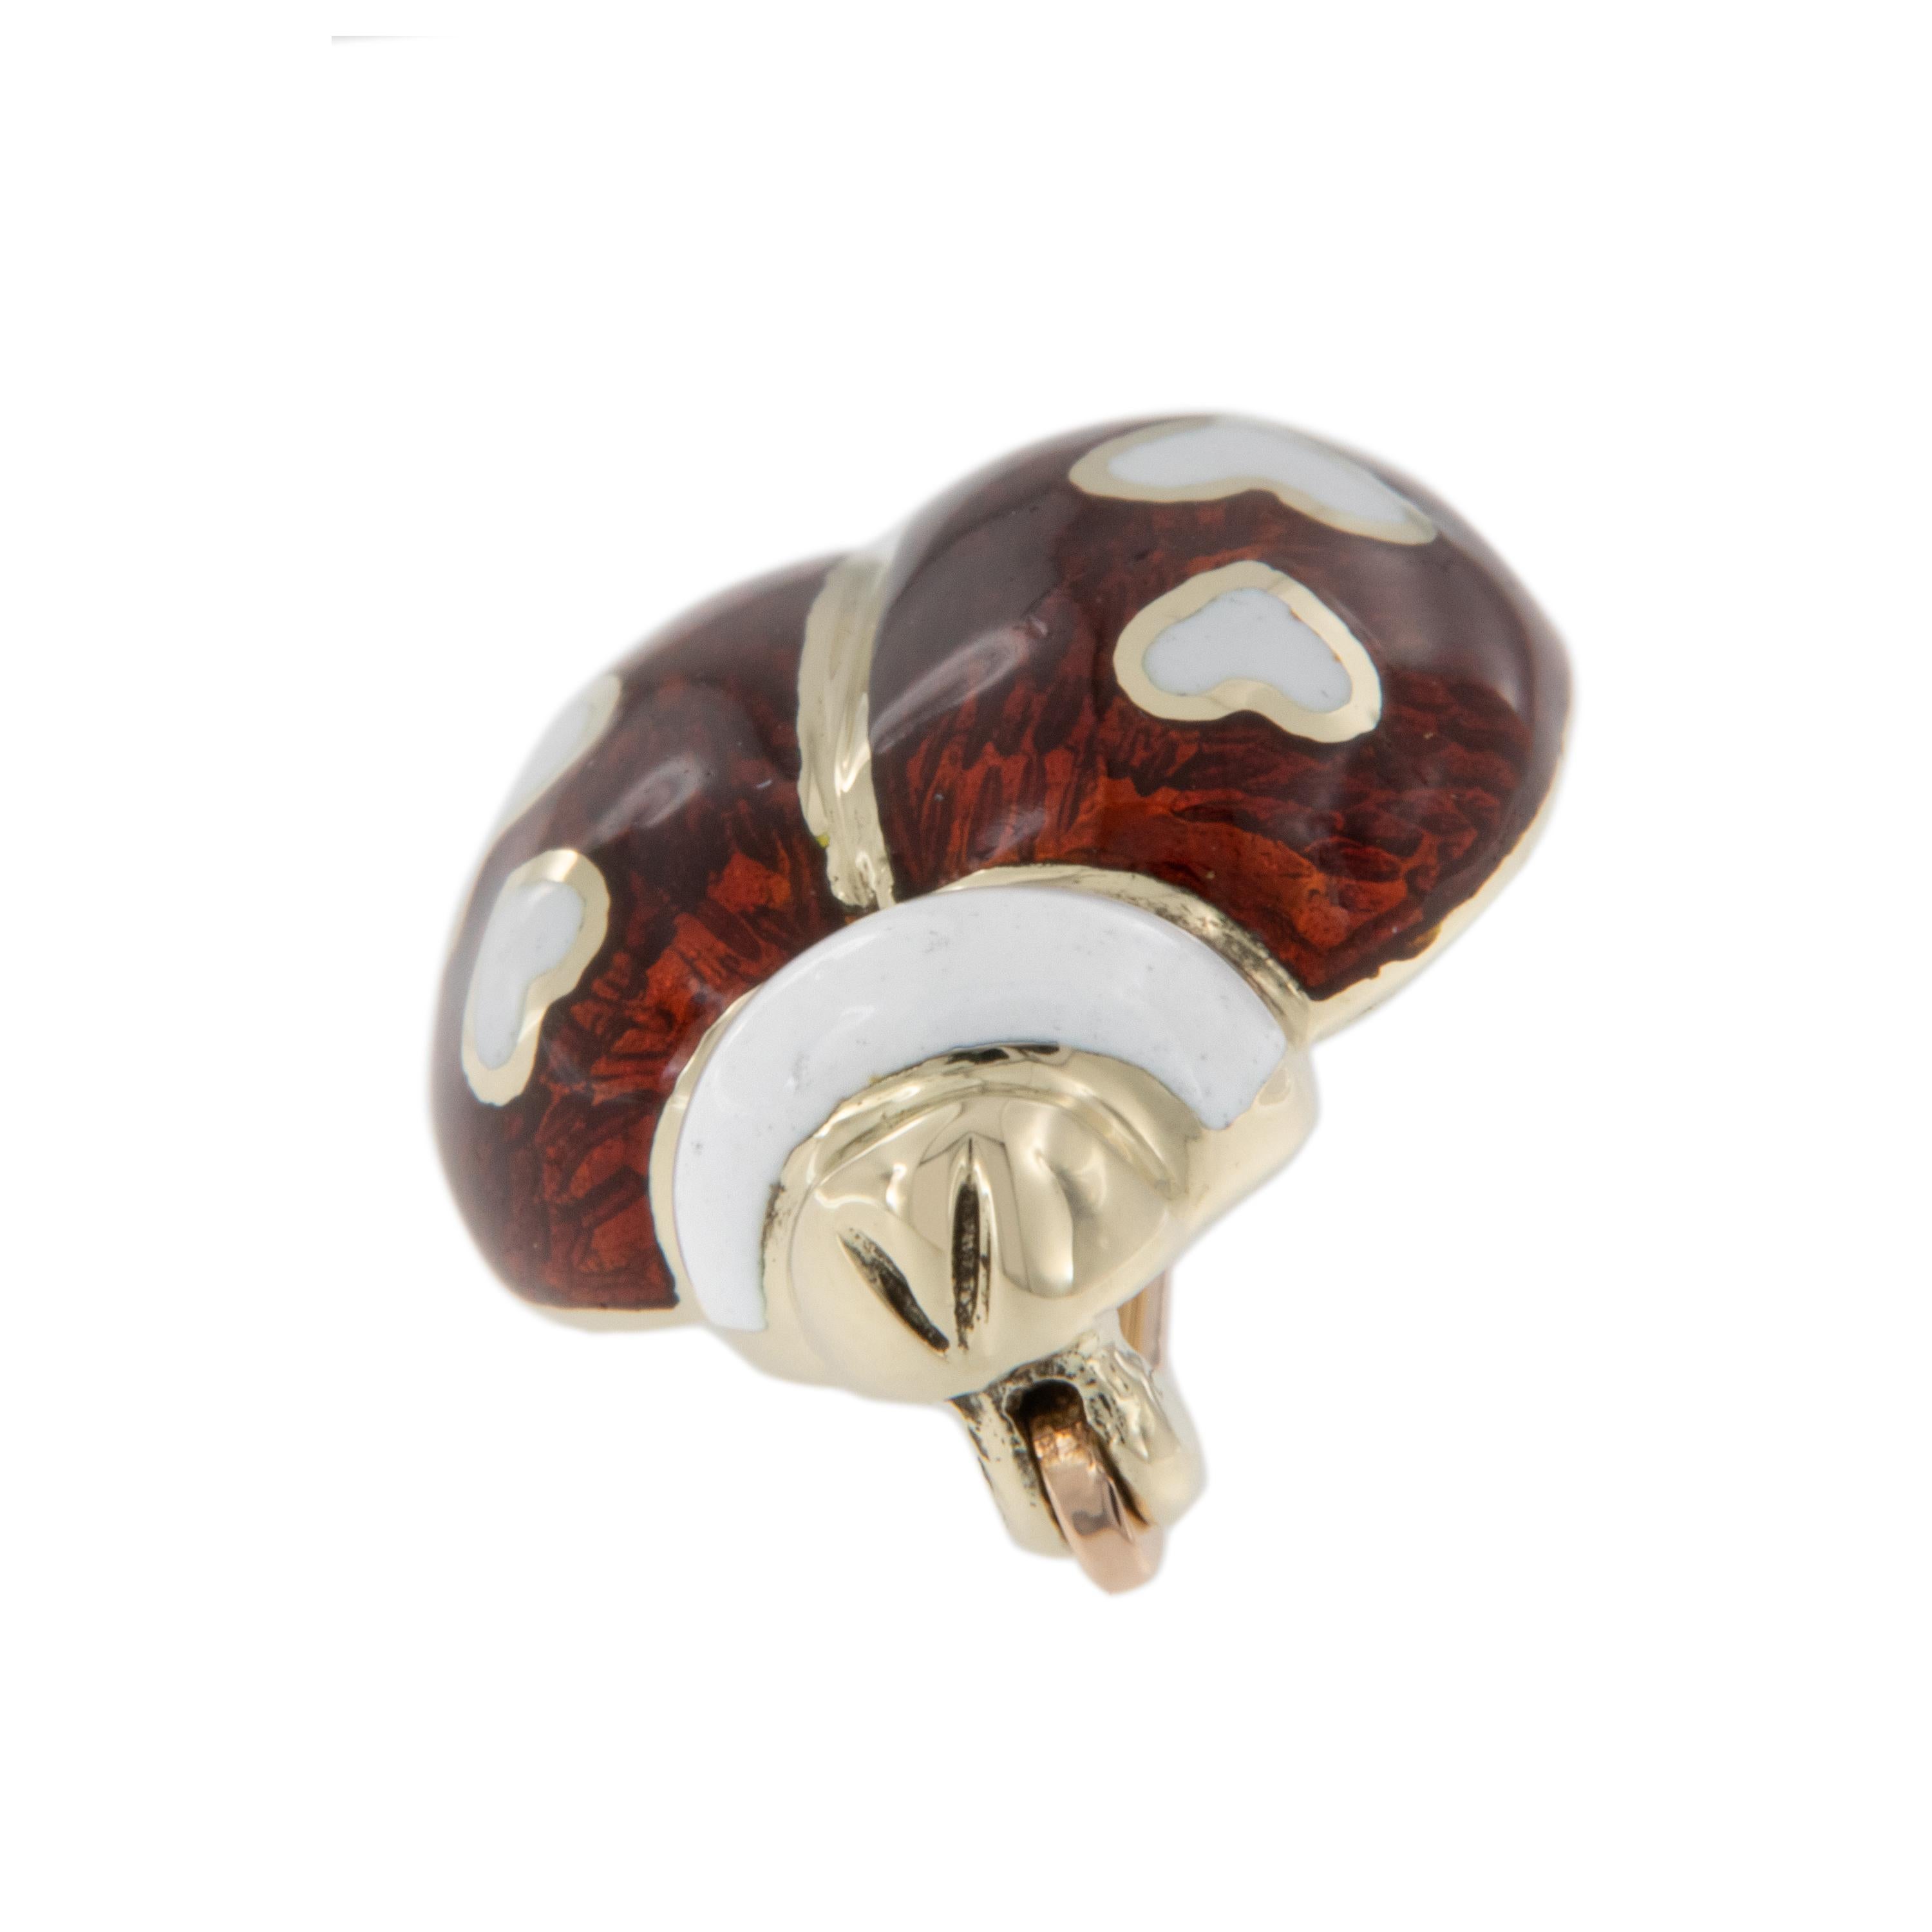 Looking adorable on your shoulder or lapel, this vintage 14 karat yellow gold ladybug pin with red & white enameling would be a great addition to your collection. Ladybugs symbolize talent, protection, healing, evolution, good fortune and grace